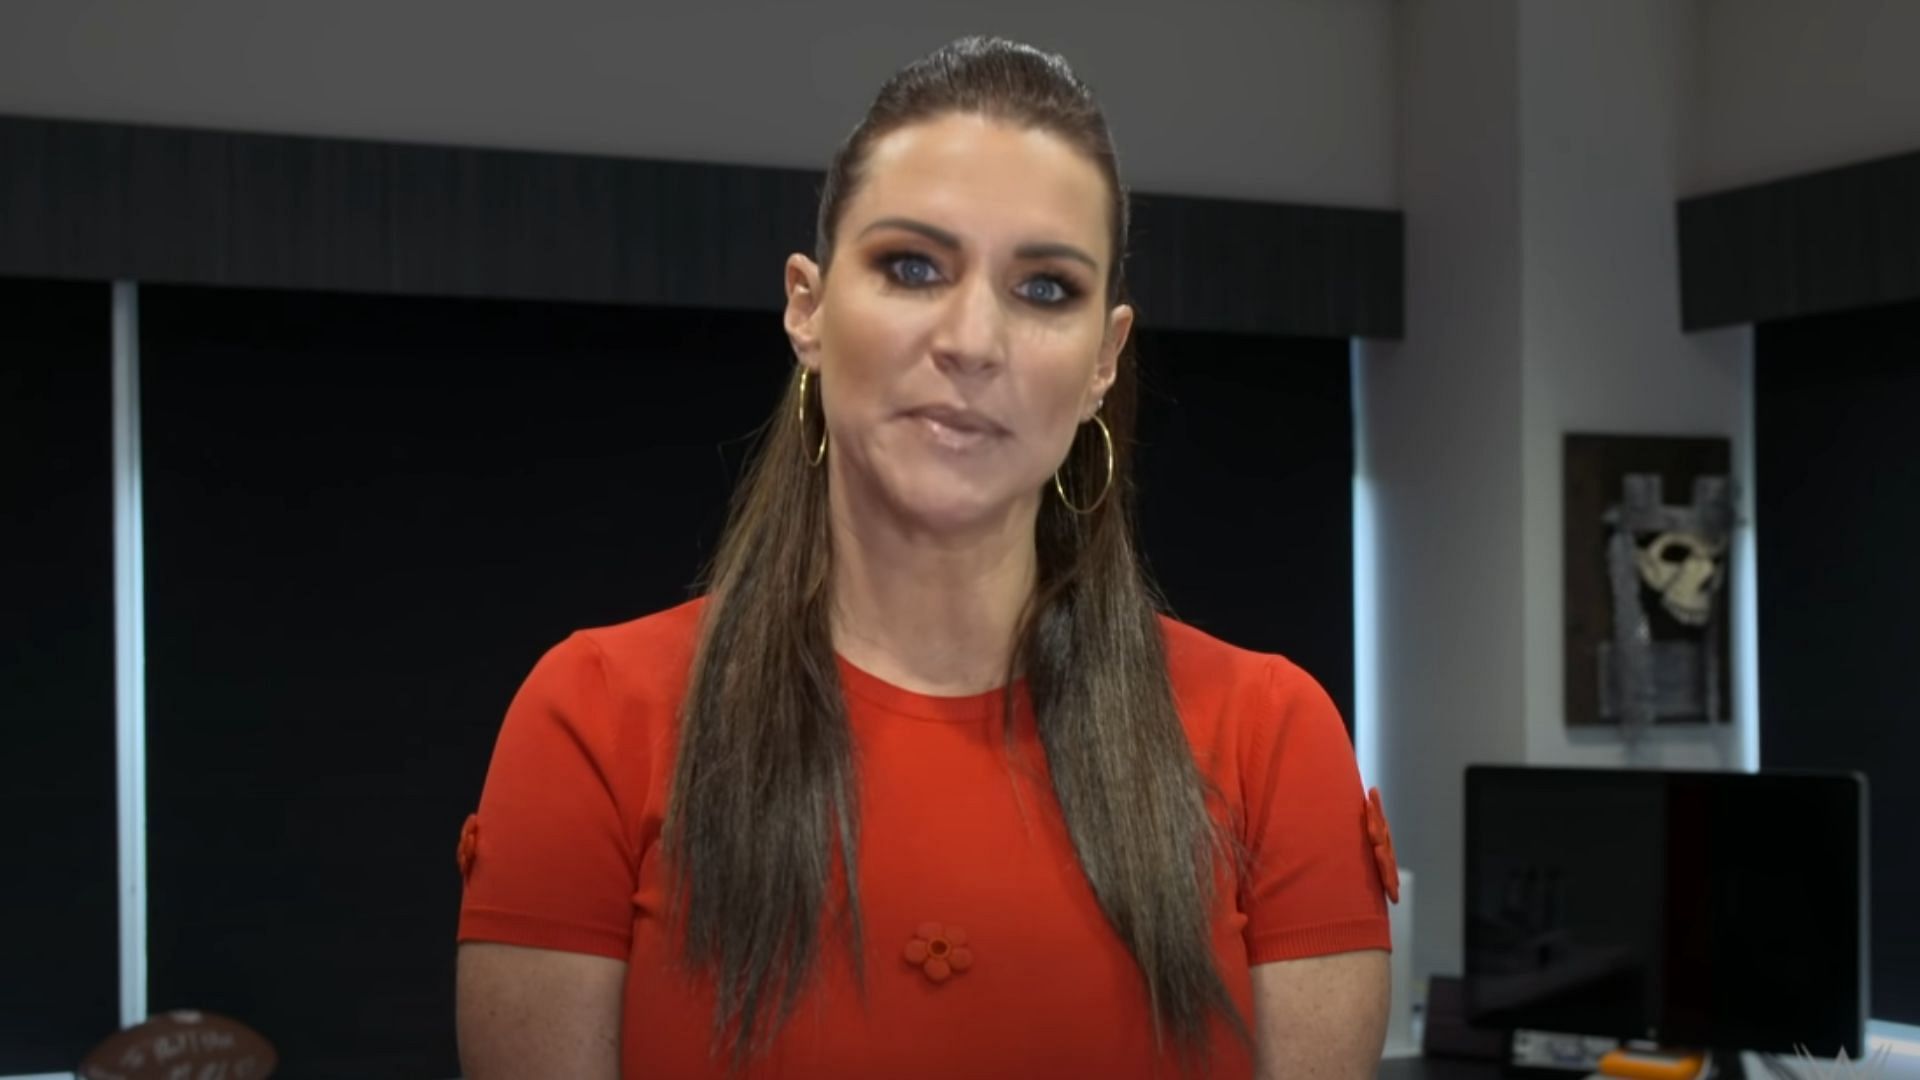 WWE Chairwoman and co-CEO Stephanie McMahon